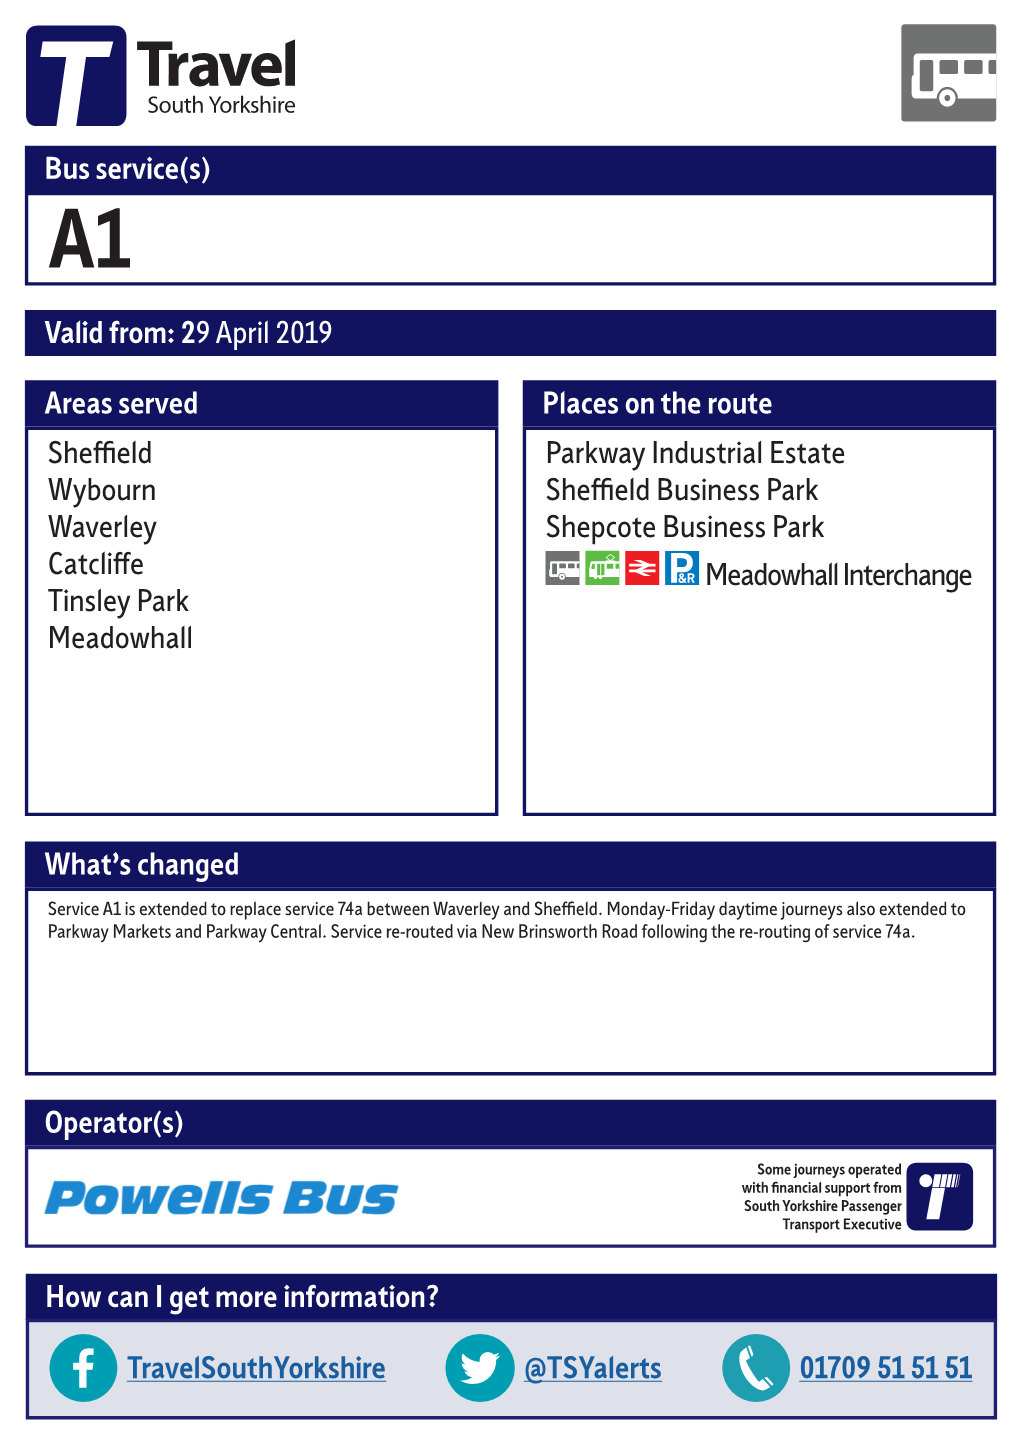 A1-Sheffield-Valid-From-29-April-2019